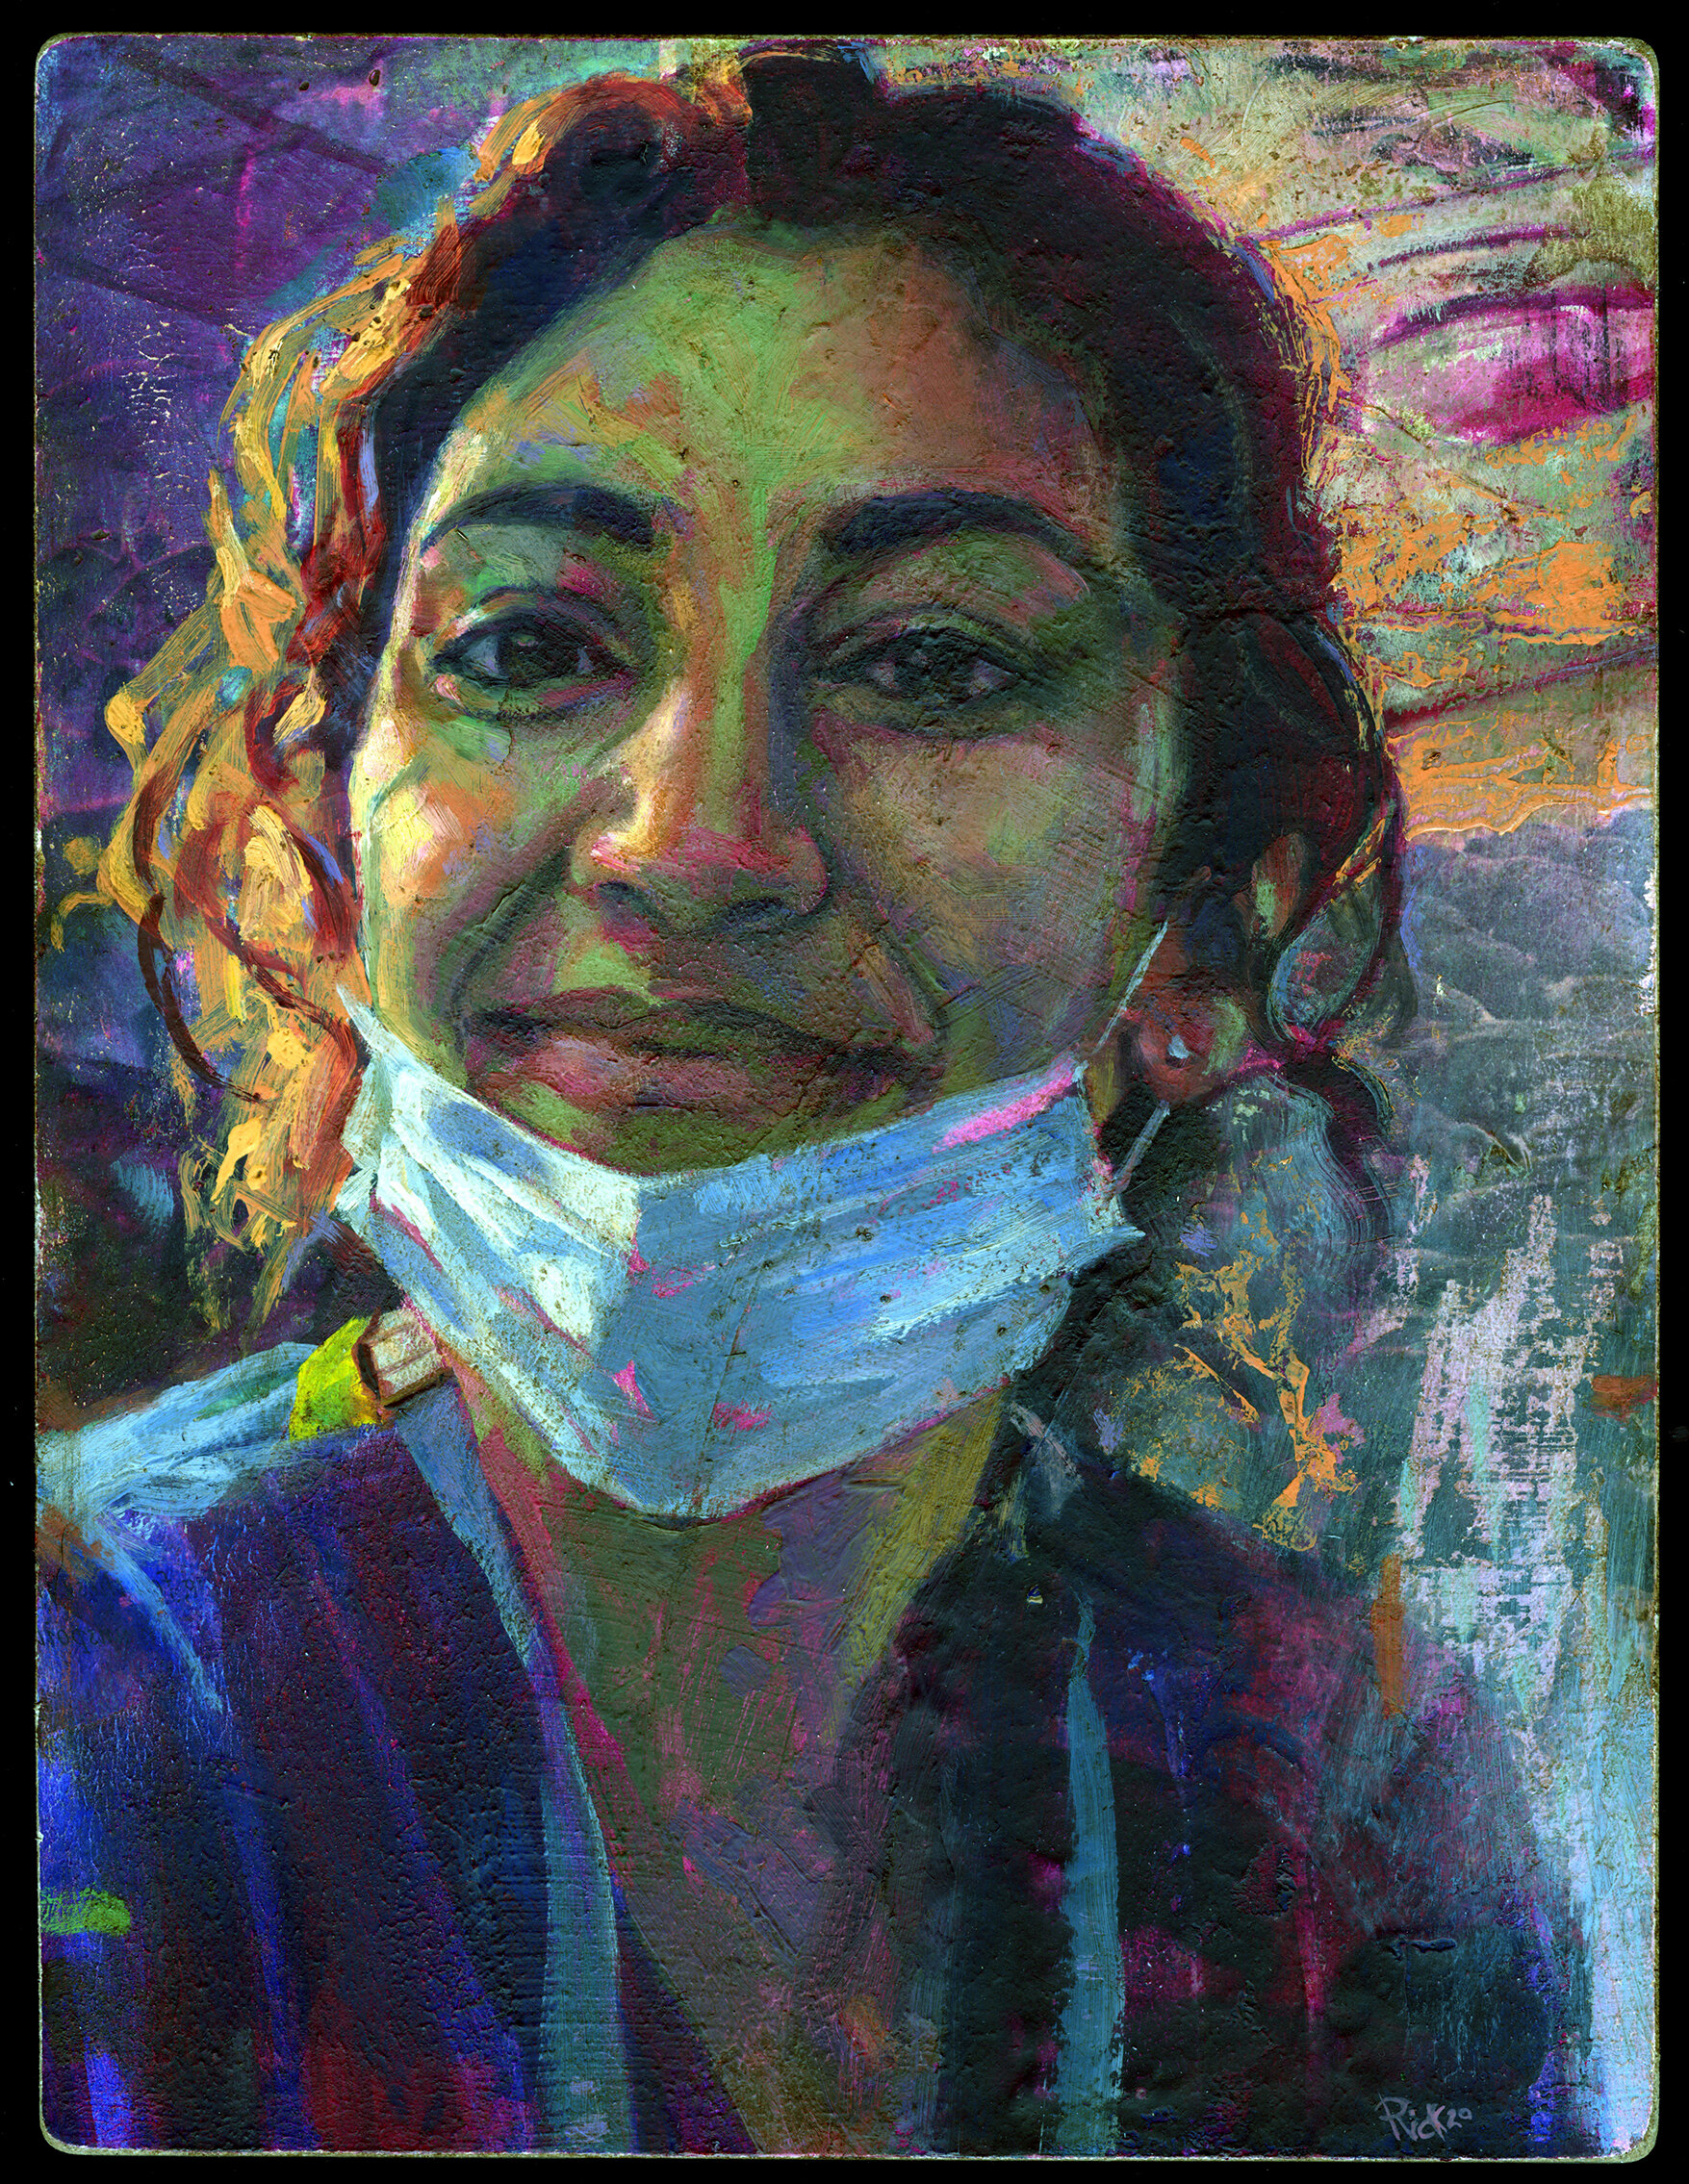  Oil and Acrylic on Acrylic Transfer on cradled Panel  10” x 13” (25.4 x 33 cm)  2020  Collection of Ammani Bashir  Painted for  Portrait For NHS Heroes  